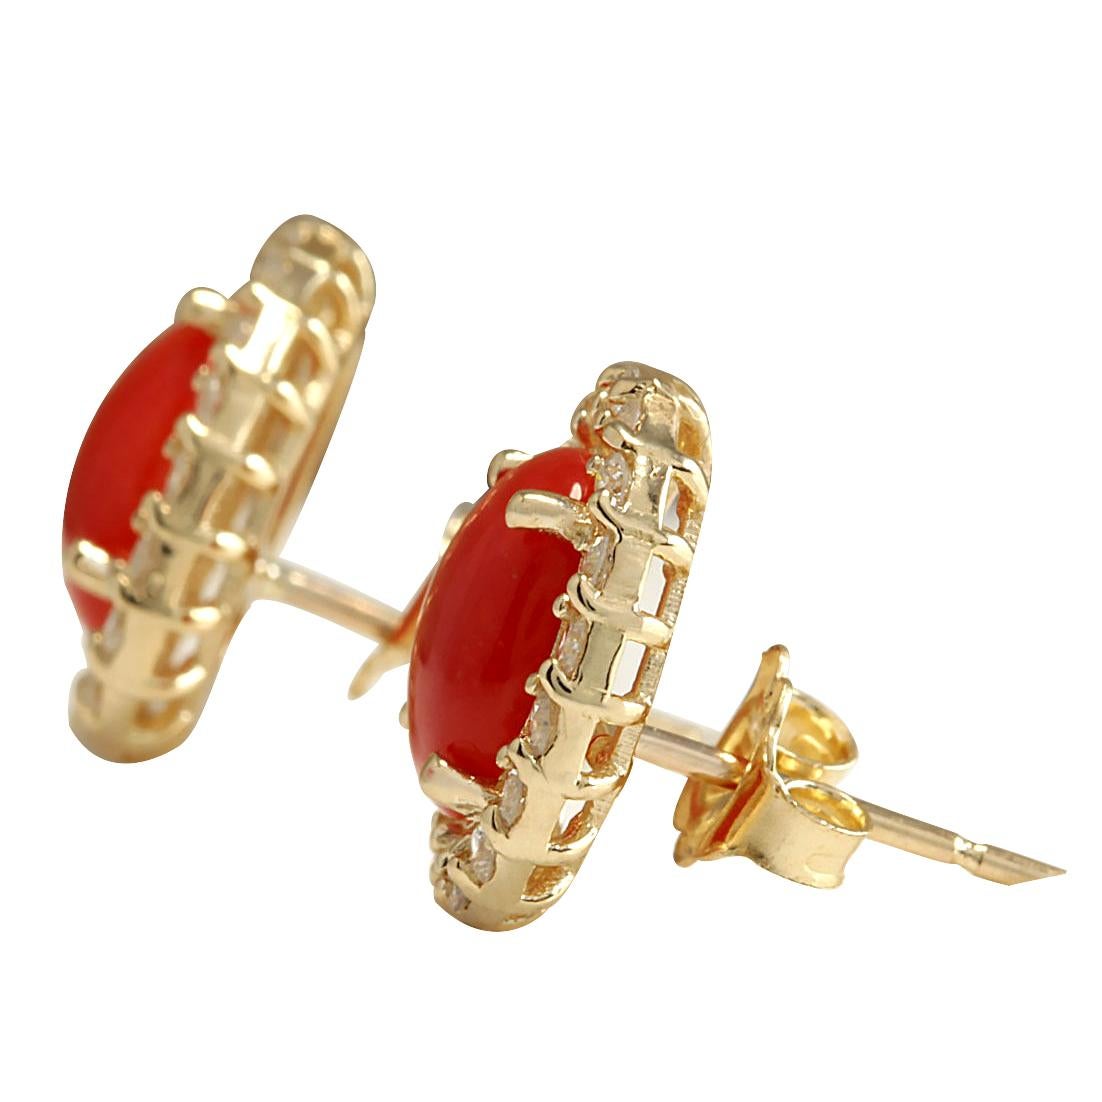 Stamped: 14K Yellow Gold
Total Earrings Weight: 3.0 Grams
Total Natural Coral Weight is 2.60 Carat (Measures: 9.00x7.00 mm)
Color: Red
Total Natural Diamond Weight is 0.50 Carat
Color: F-G, Clarity: VS2-SI1
Face Measures: 13.75x11.65 mm
Sku: